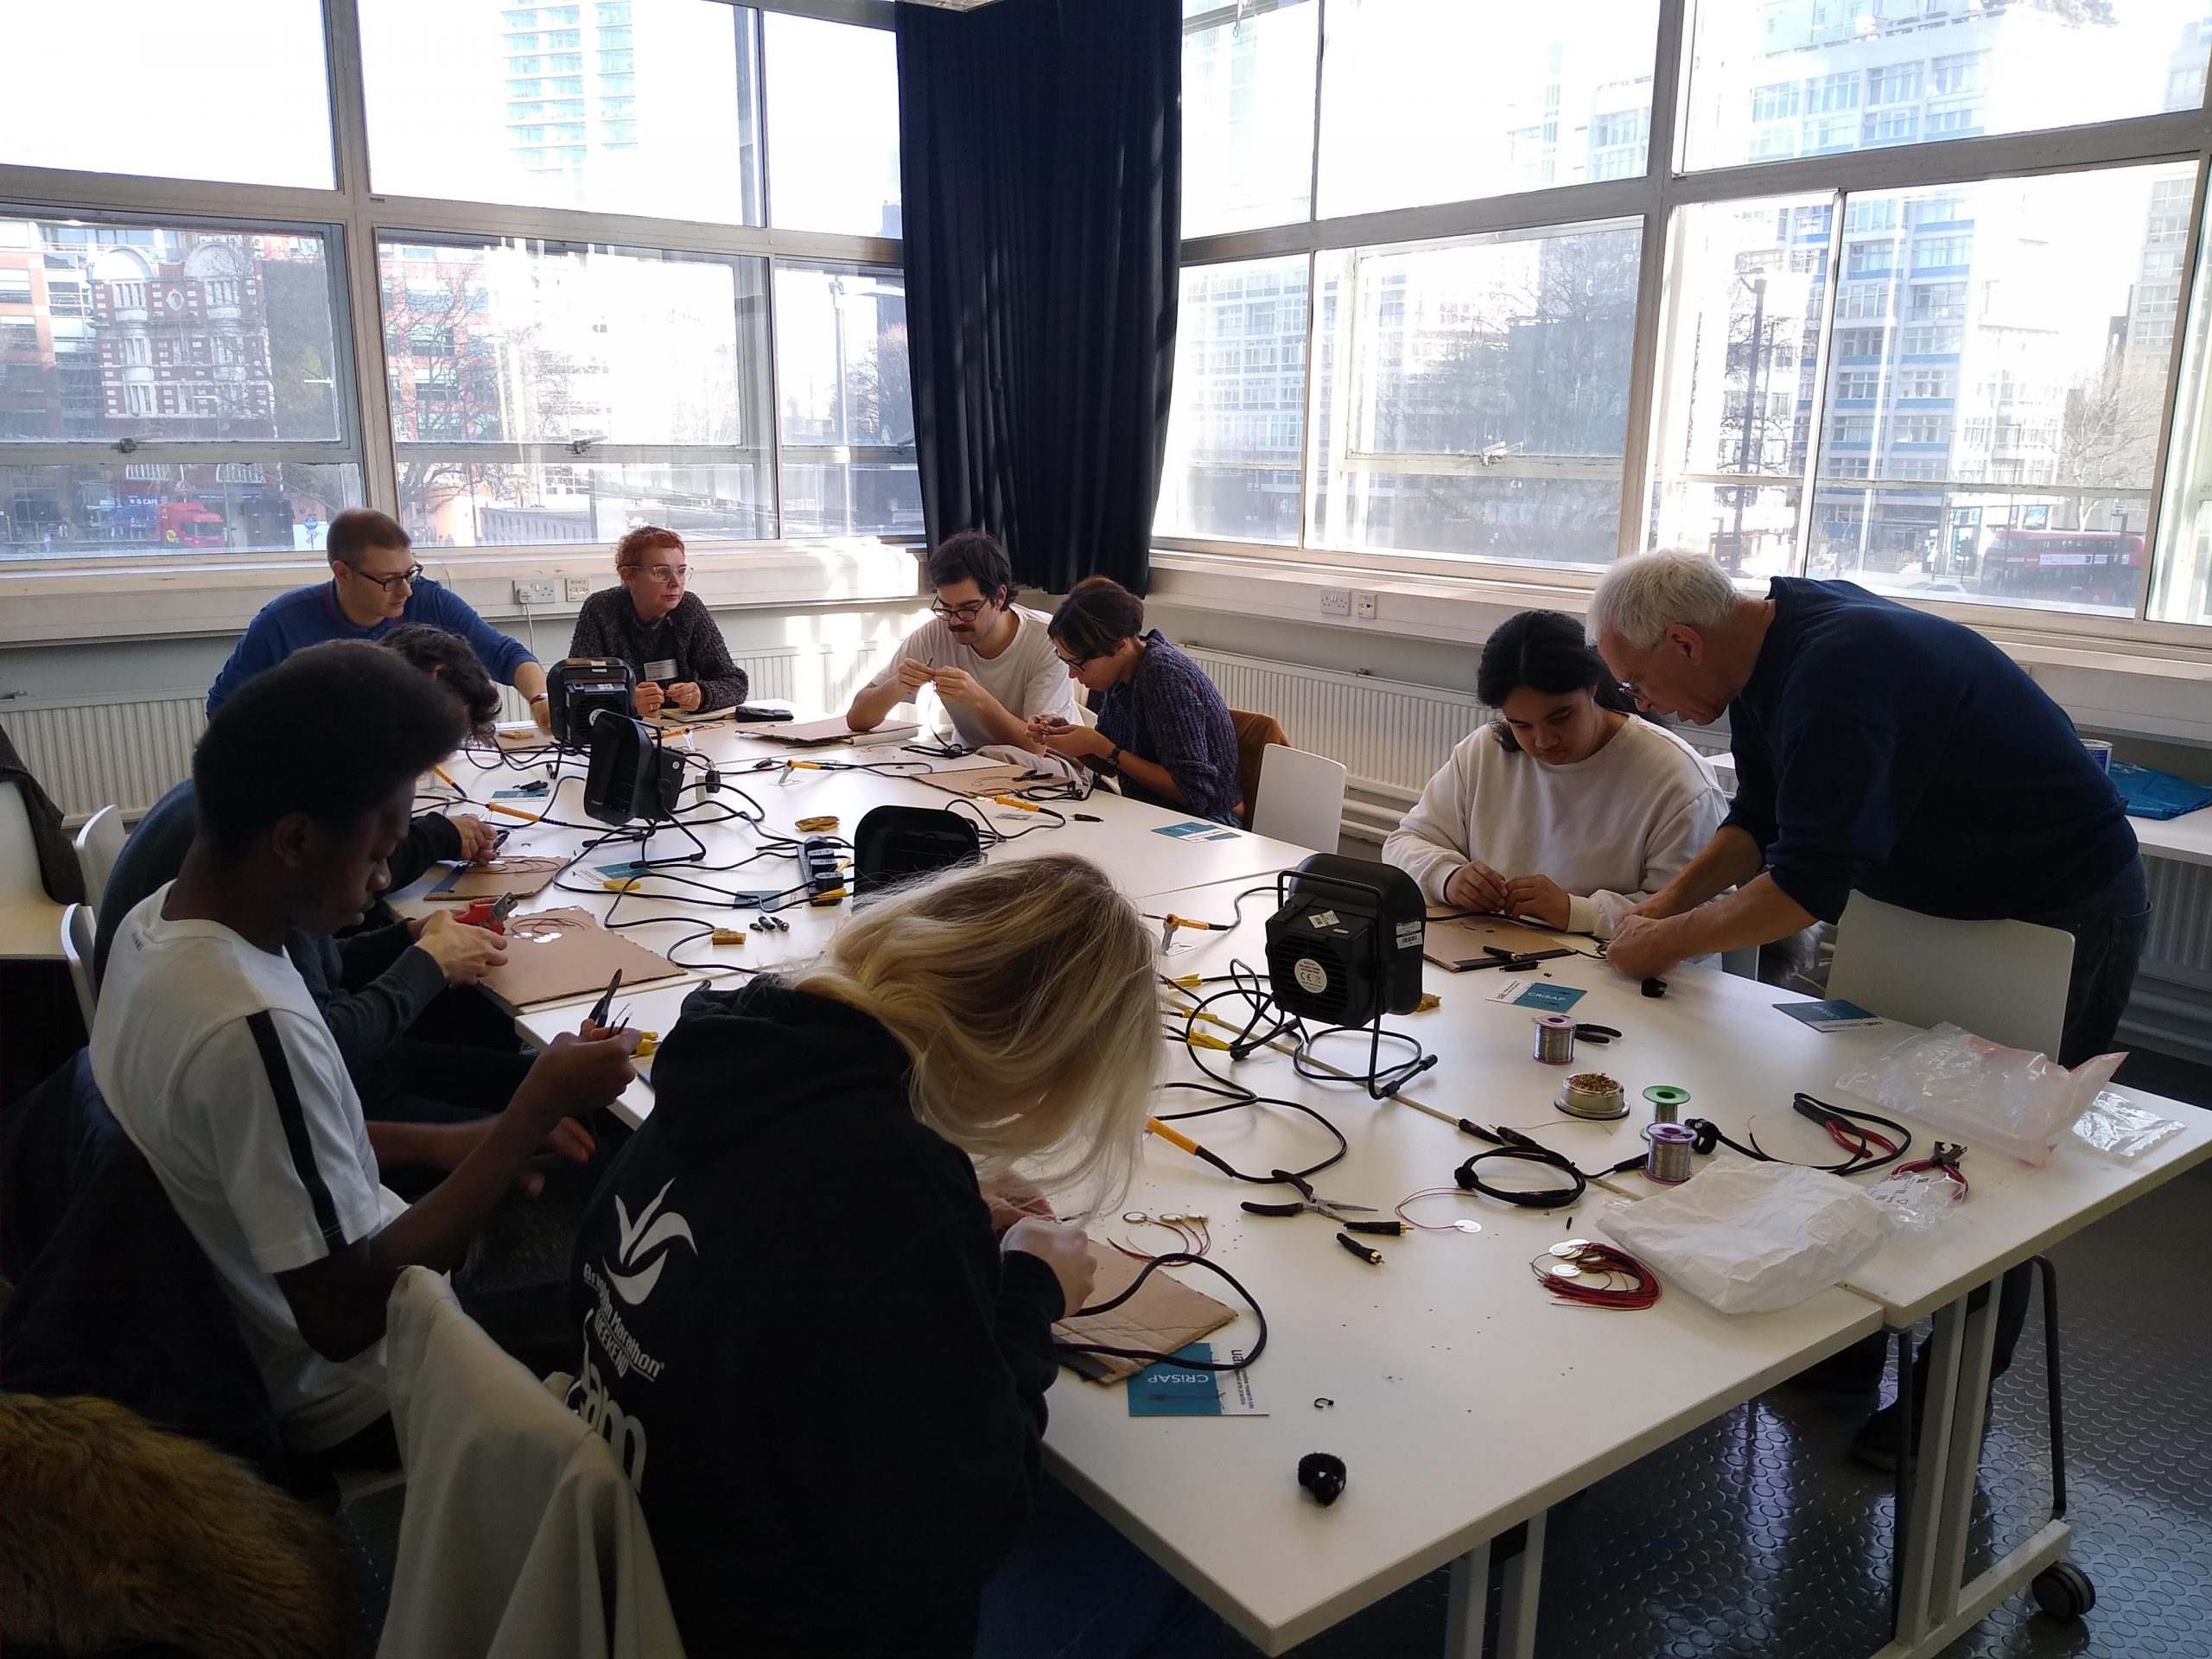 A room with 8 people working at a table covered in wires